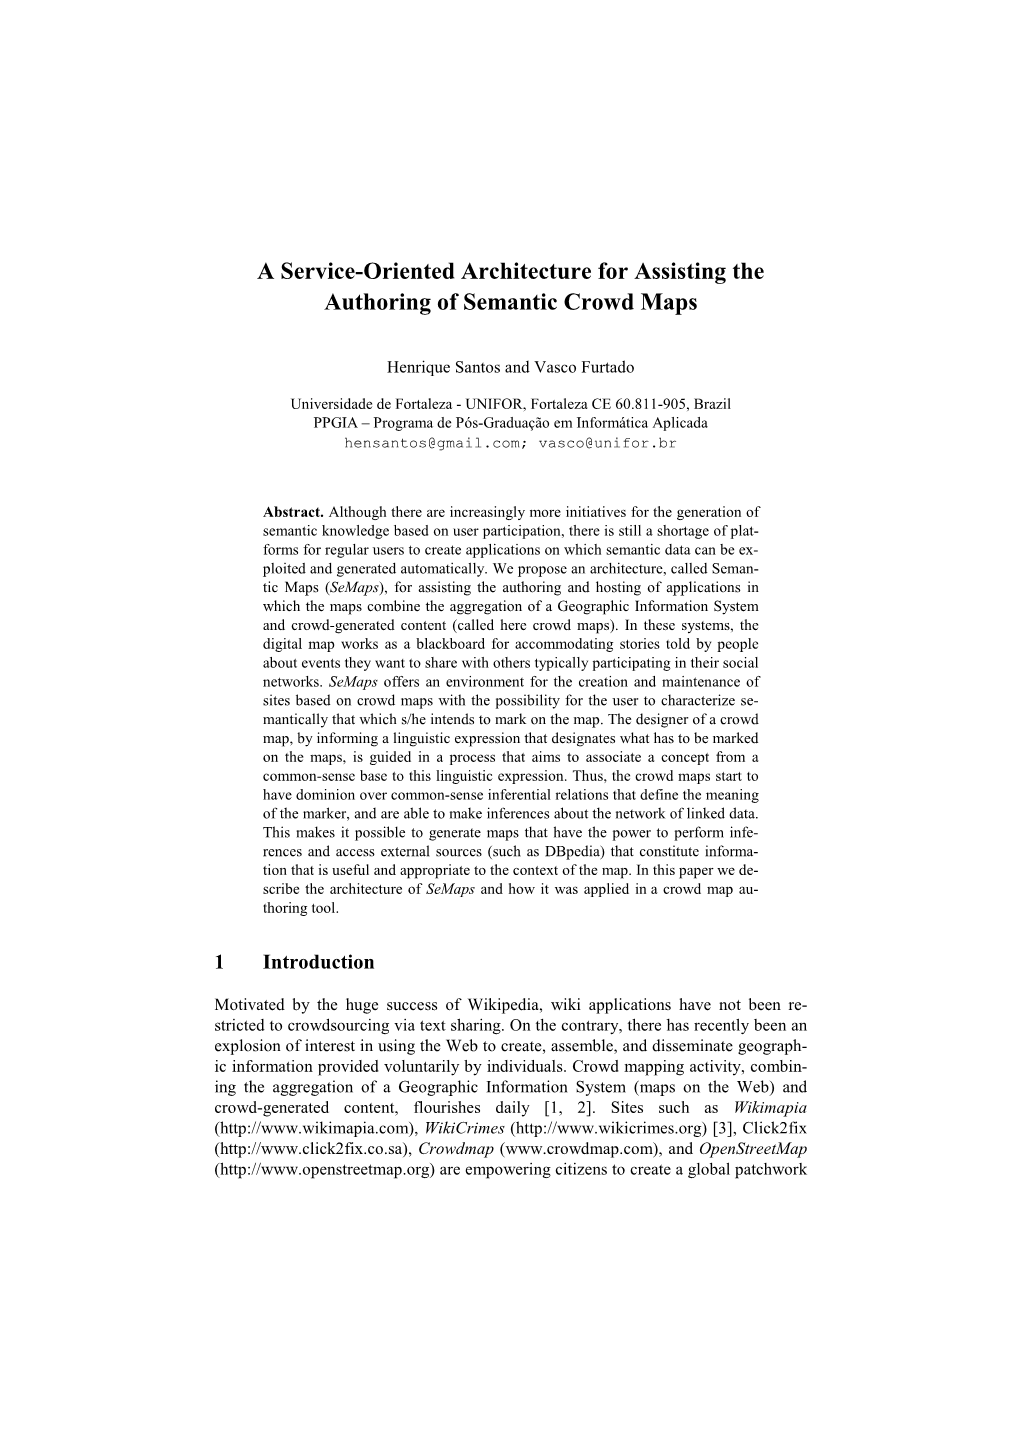 A Service-Oriented Architecture for Assisting the Authoring of Semantic Crowd Maps